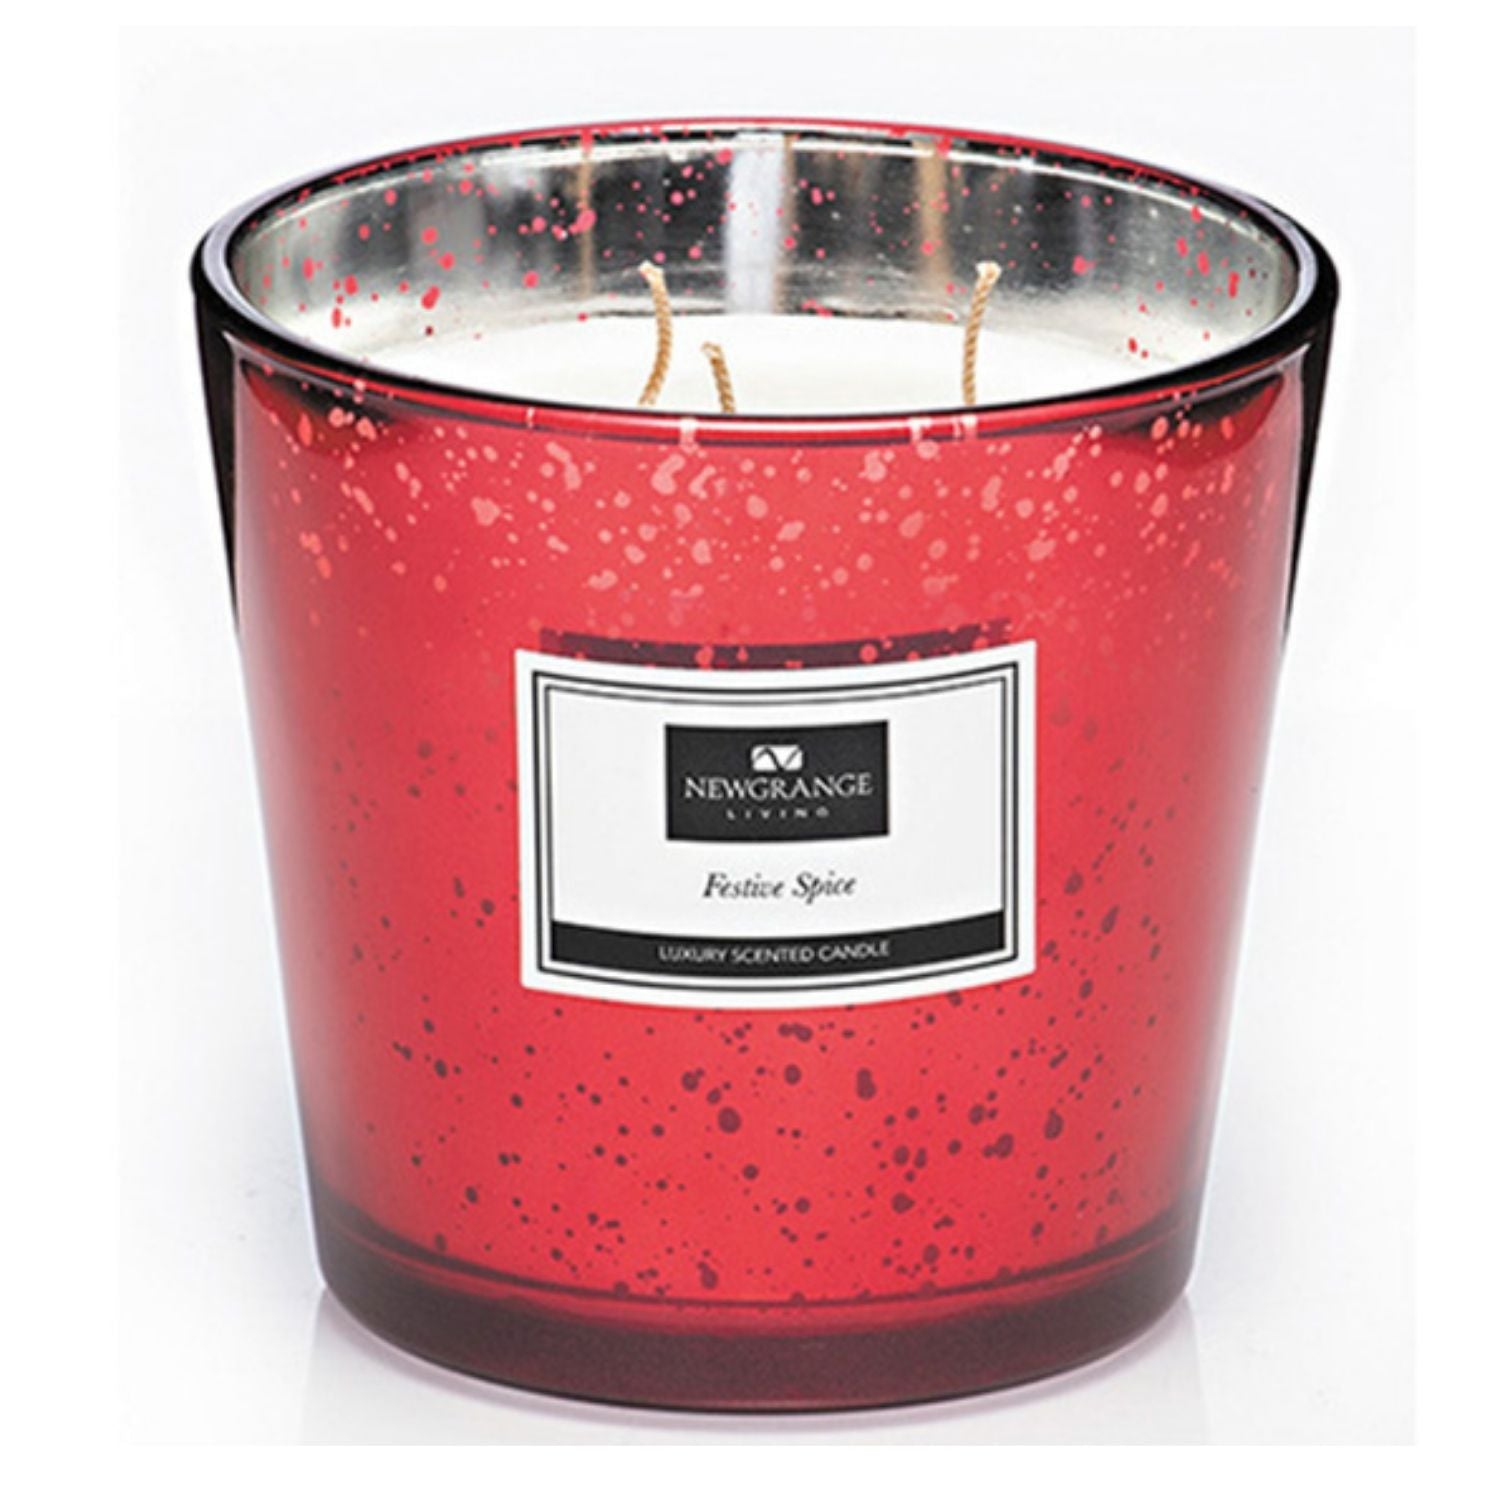 Shaws Department Stores 3 Wick Christmas Candle - Gift Boxed 1 Shaws Department Stores